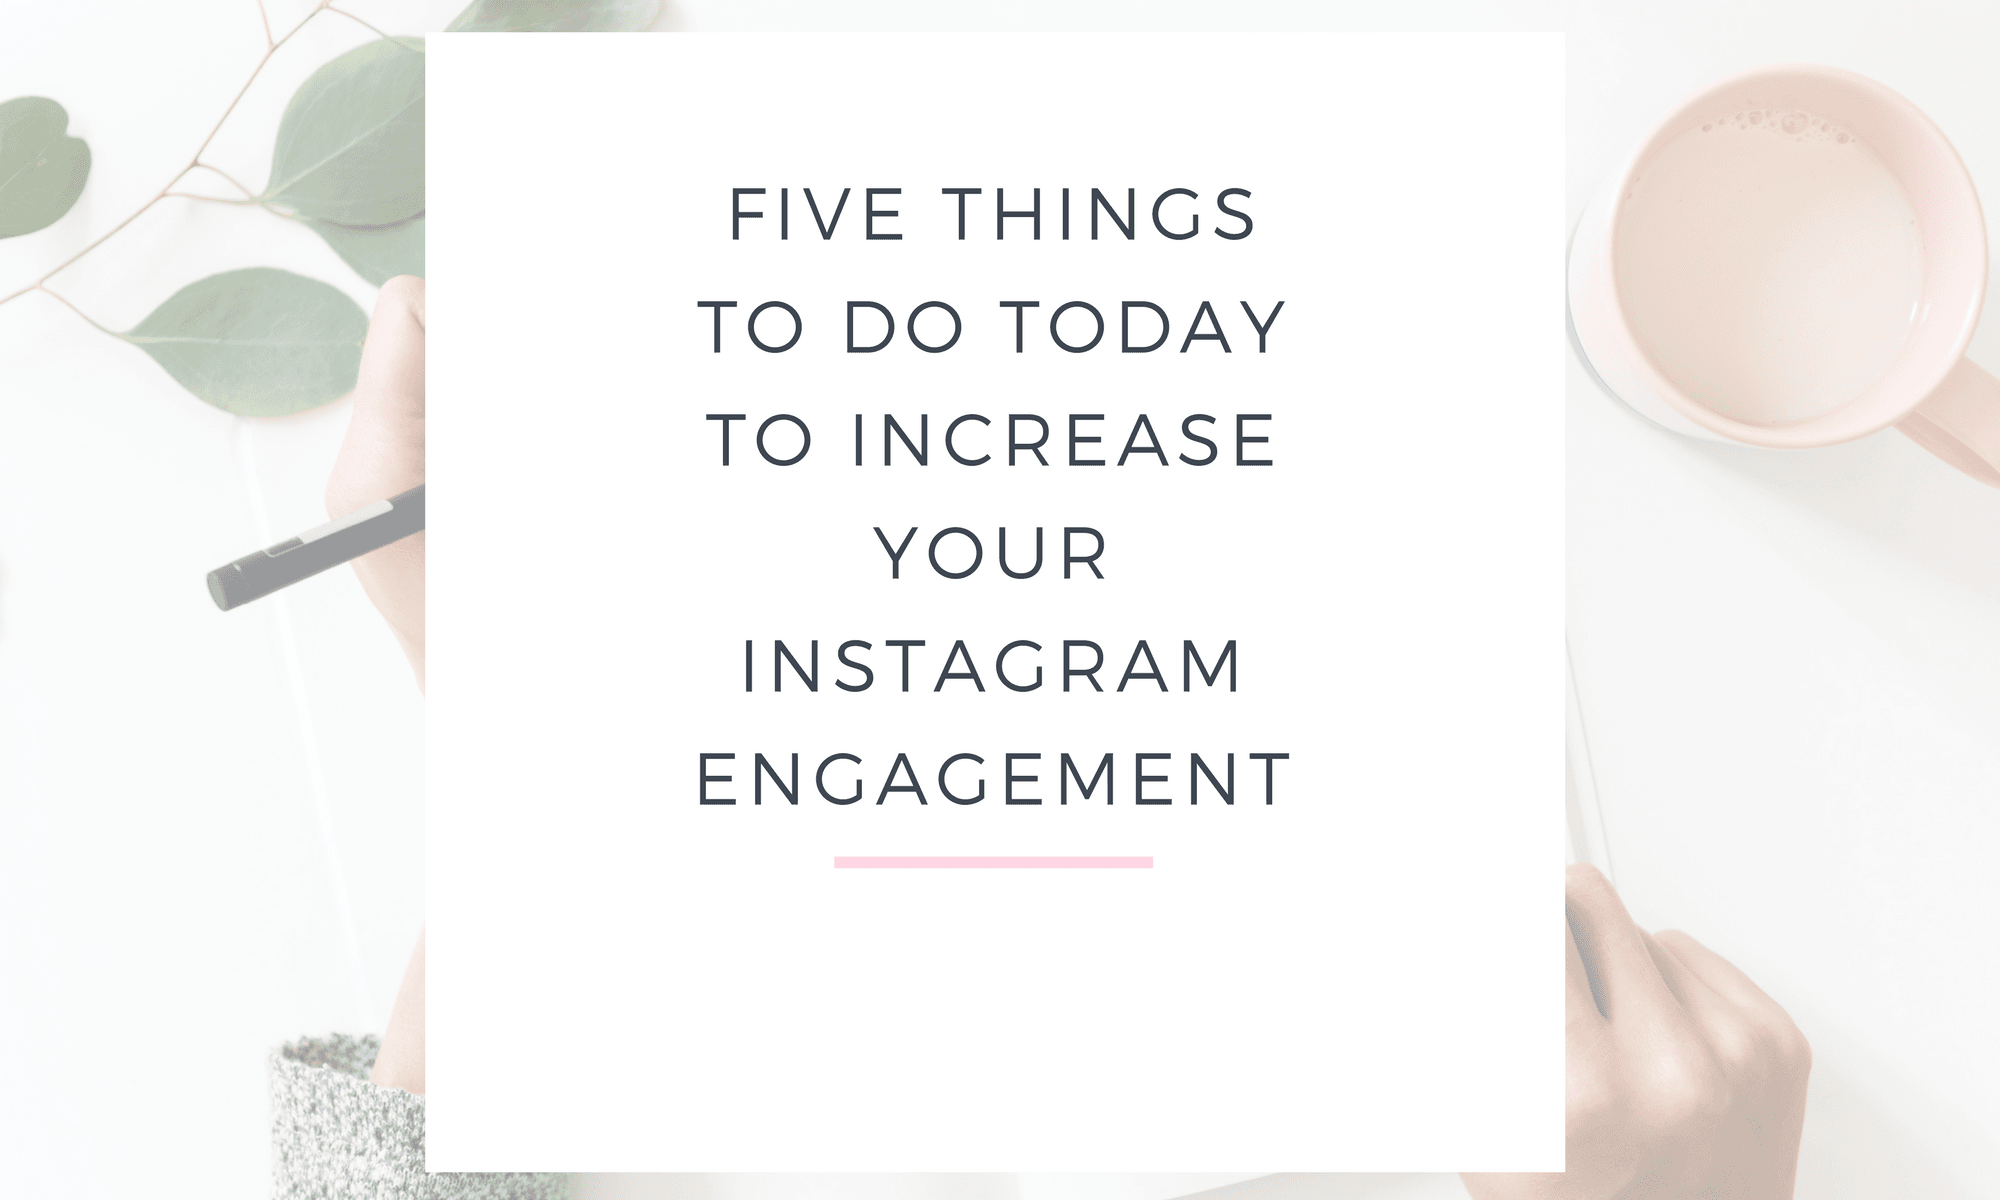 FIVE THINGS TO DO TODAY TO INCREASE YOUR INSTAGRAM ENGAGEMENT